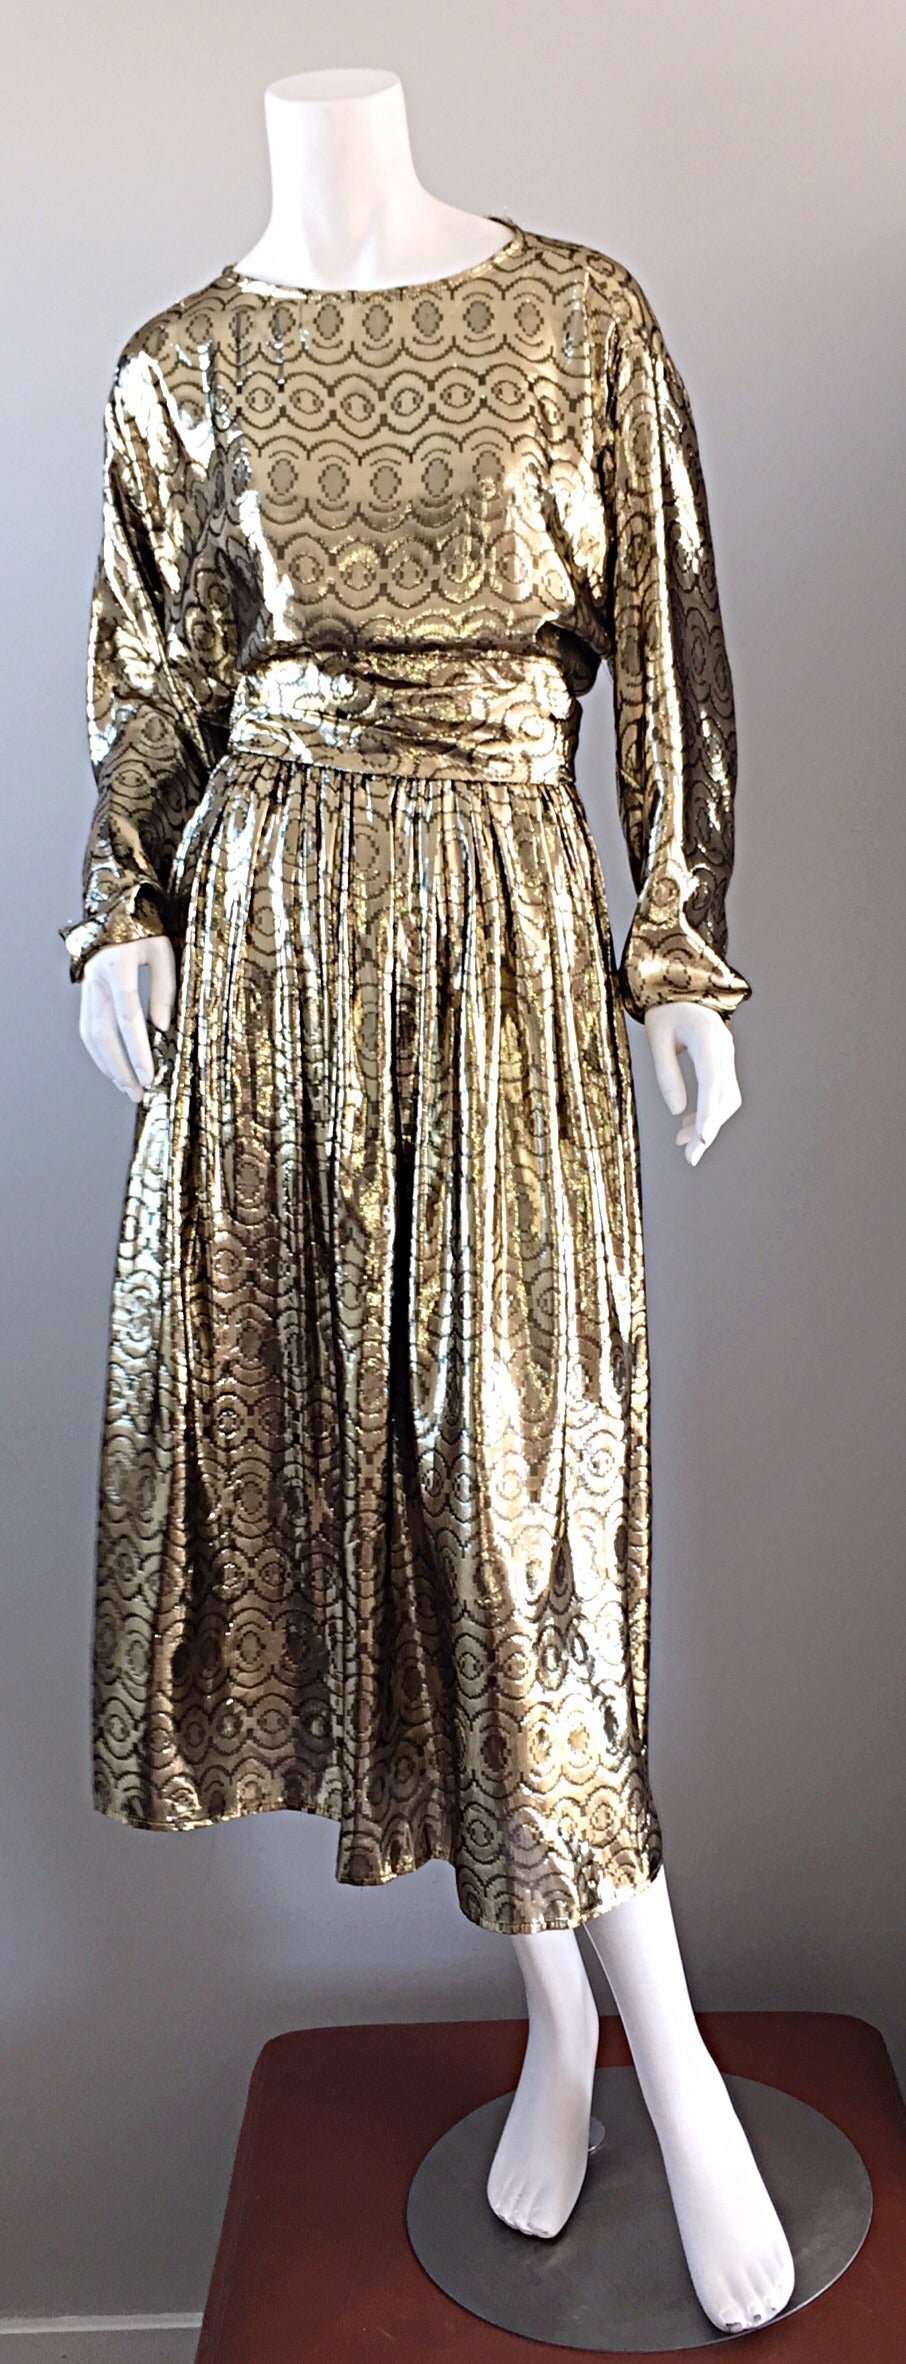 Incredible vintage 'LIQUID GOLD' disco dress! Chic dolman sleeves, with a detachable belt in same fabric, with two rhinestone closures at back. Faint swirl prints throughout. Full skirt that looks great on the dance floor! A real statement dress,